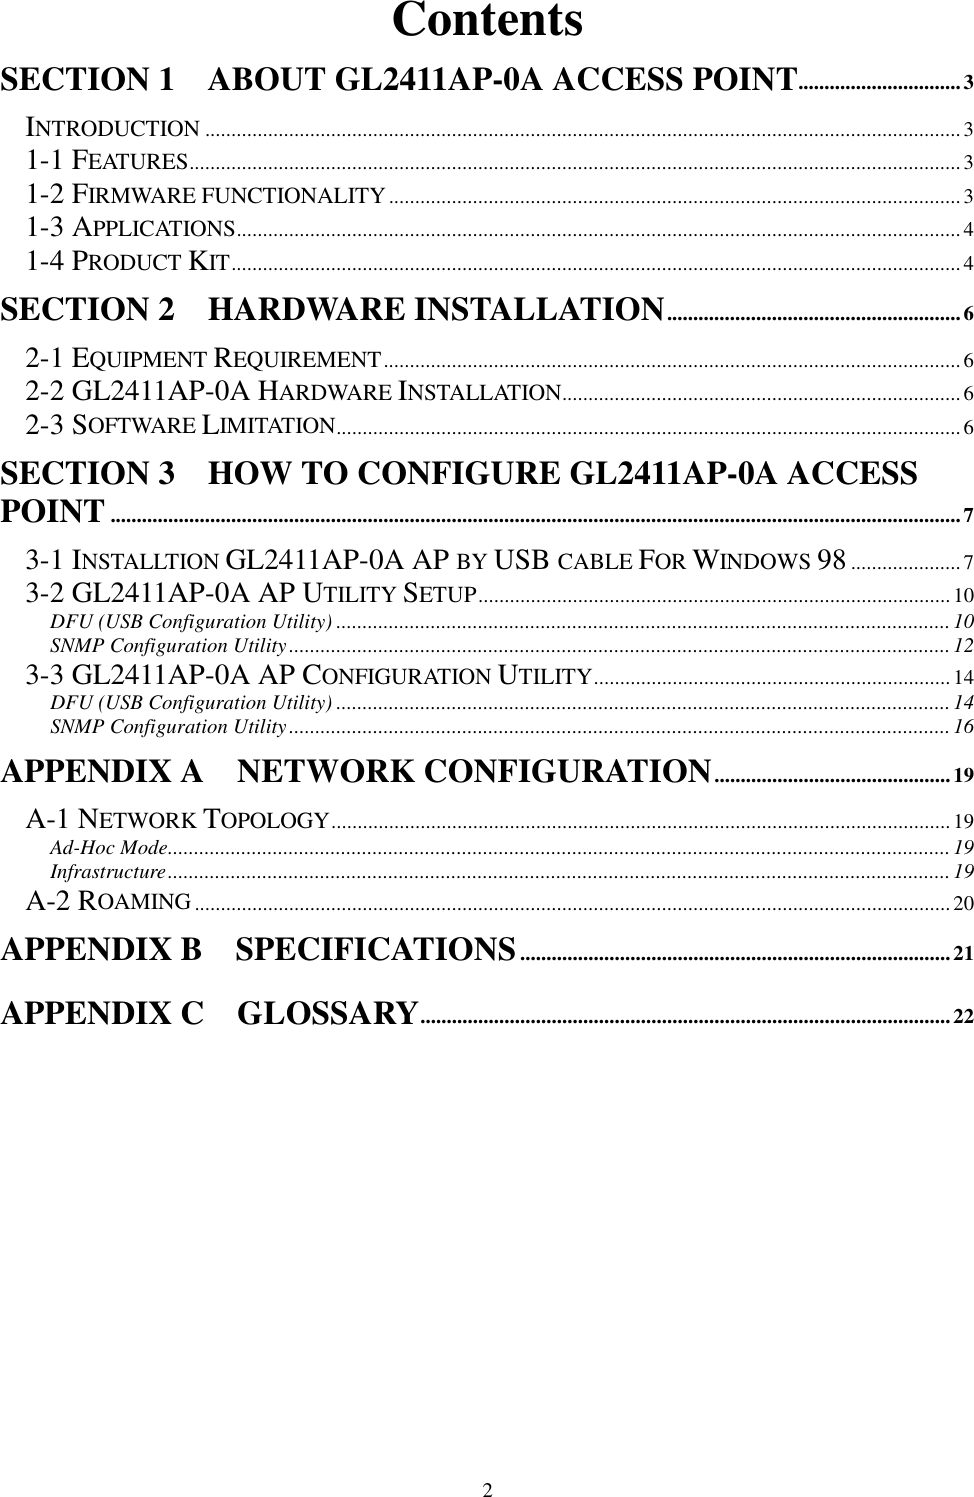 2ContentsSECTION 1    ABOUT GL2411AP-0A ACCESS POINT...............................3INTRODUCTION ................................................................................................................................................31-1 FEATURES...................................................................................................................................................31-2 FIRMWARE FUNCTIONALITY.............................................................................................................31-3 APPLICATIONS..........................................................................................................................................41-4 PRODUCT KIT...........................................................................................................................................4SECTION 2    HARDWARE INSTALLATION........................................................62-1 EQUIPMENT REQUIREMENT.............................................................................................................. 62-2 GL2411AP-0A HARDWARE INSTALLATION............................................................................62-3 SOFTWARE LIMITATION.......................................................................................................................6SECTION 3    HOW TO CONFIGURE GL2411AP-0A ACCESSPOINT..................................................................................................................................................................73-1 INSTALLTION GL2411AP-0A AP BY USB CABLE FOR WINDOWS 98..................... 73-2 GL2411AP-0A AP UTILITY SETUP..........................................................................................10DFU (USB Configuration Utility) .....................................................................................................................10SNMP Configuration Utility.............................................................................................................................. 123-3 GL2411AP-0A AP CONFIGURATION UTILITY....................................................................14DFU (USB Configuration Utility) .....................................................................................................................14SNMP Configuration Utility.............................................................................................................................. 16APPENDIX A  NETWORK CONFIGURATION.............................................19A-1 NETWORK TOPOLOGY......................................................................................................................19Ad-Hoc Mode.....................................................................................................................................................19Infrastructure.....................................................................................................................................................19A-2 ROAMING................................................................................................................................................20APPENDIX B    SPECIFICATIONS..................................................................................21APPENDIX C  GLOSSARY.....................................................................................................22